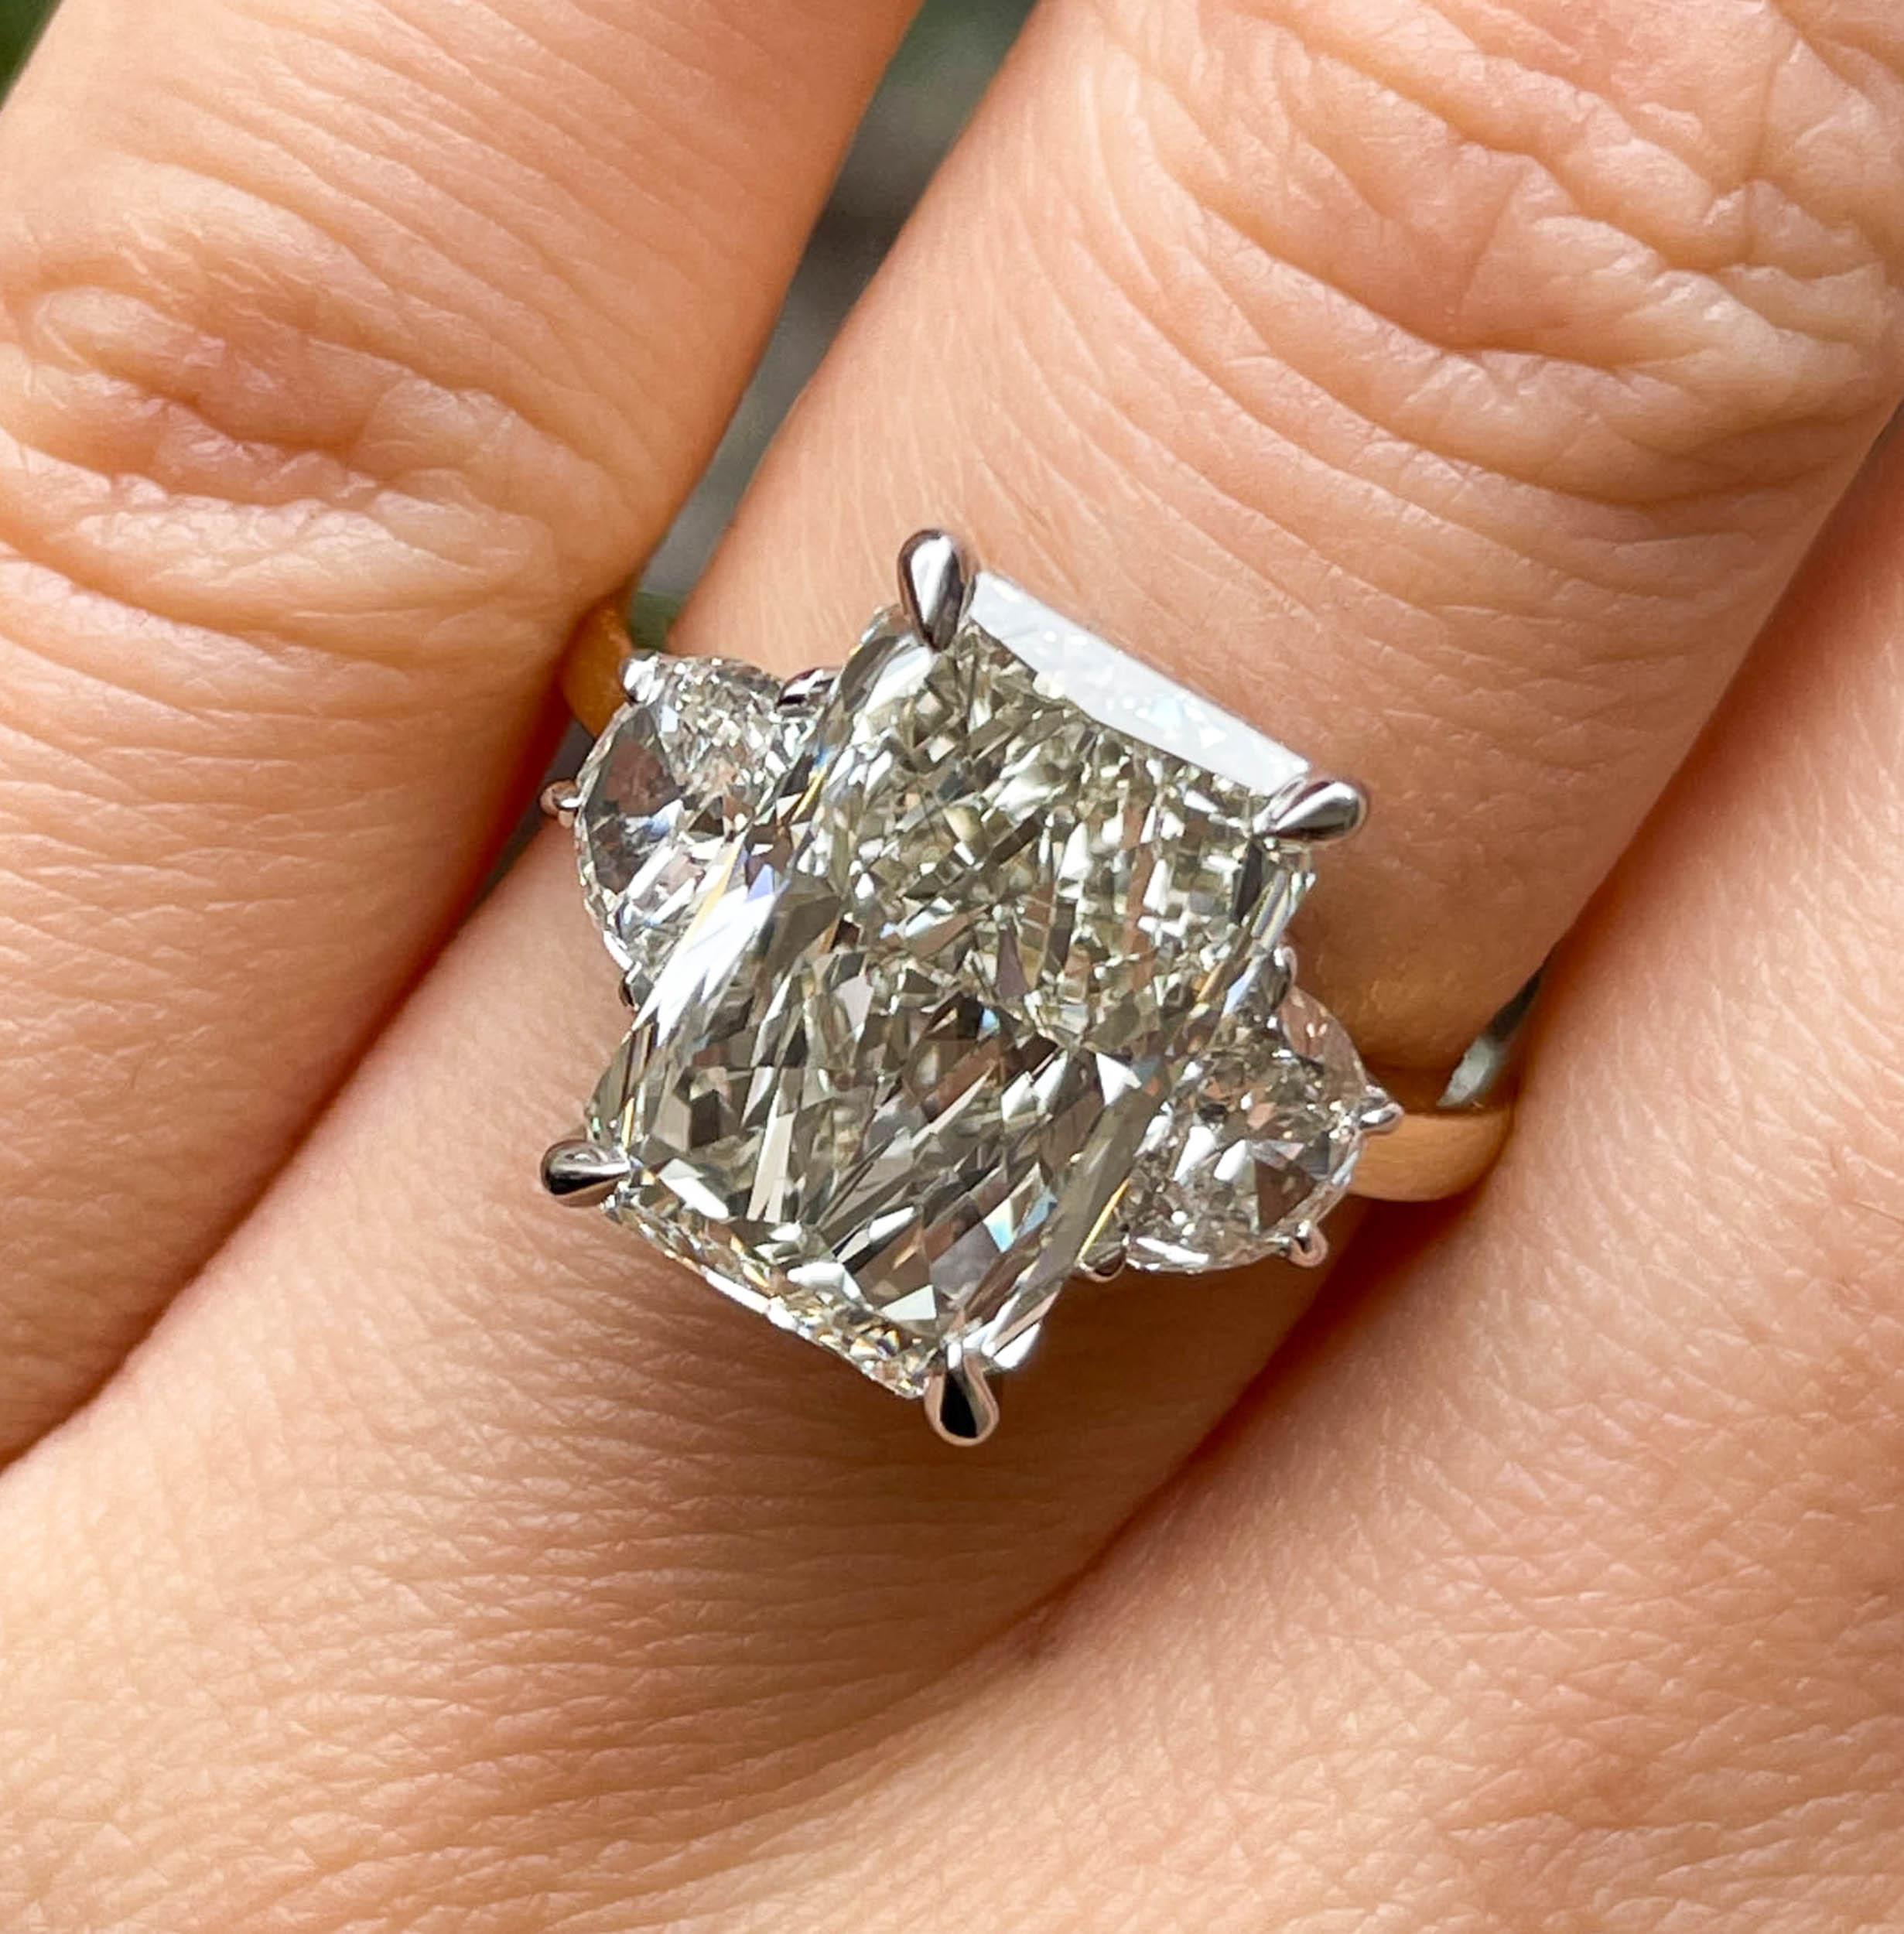 A Breathtaking Estate HANDMADE Platinum/18k Yellow Gold (stamped) Radiant Diamond Three-Stone Engagement ring contains GIA certified 5.21ct Radiant cut center diamond in N color and VS1 clarity; with measurements of 12.55x8.36x5.40mm. GIA report #